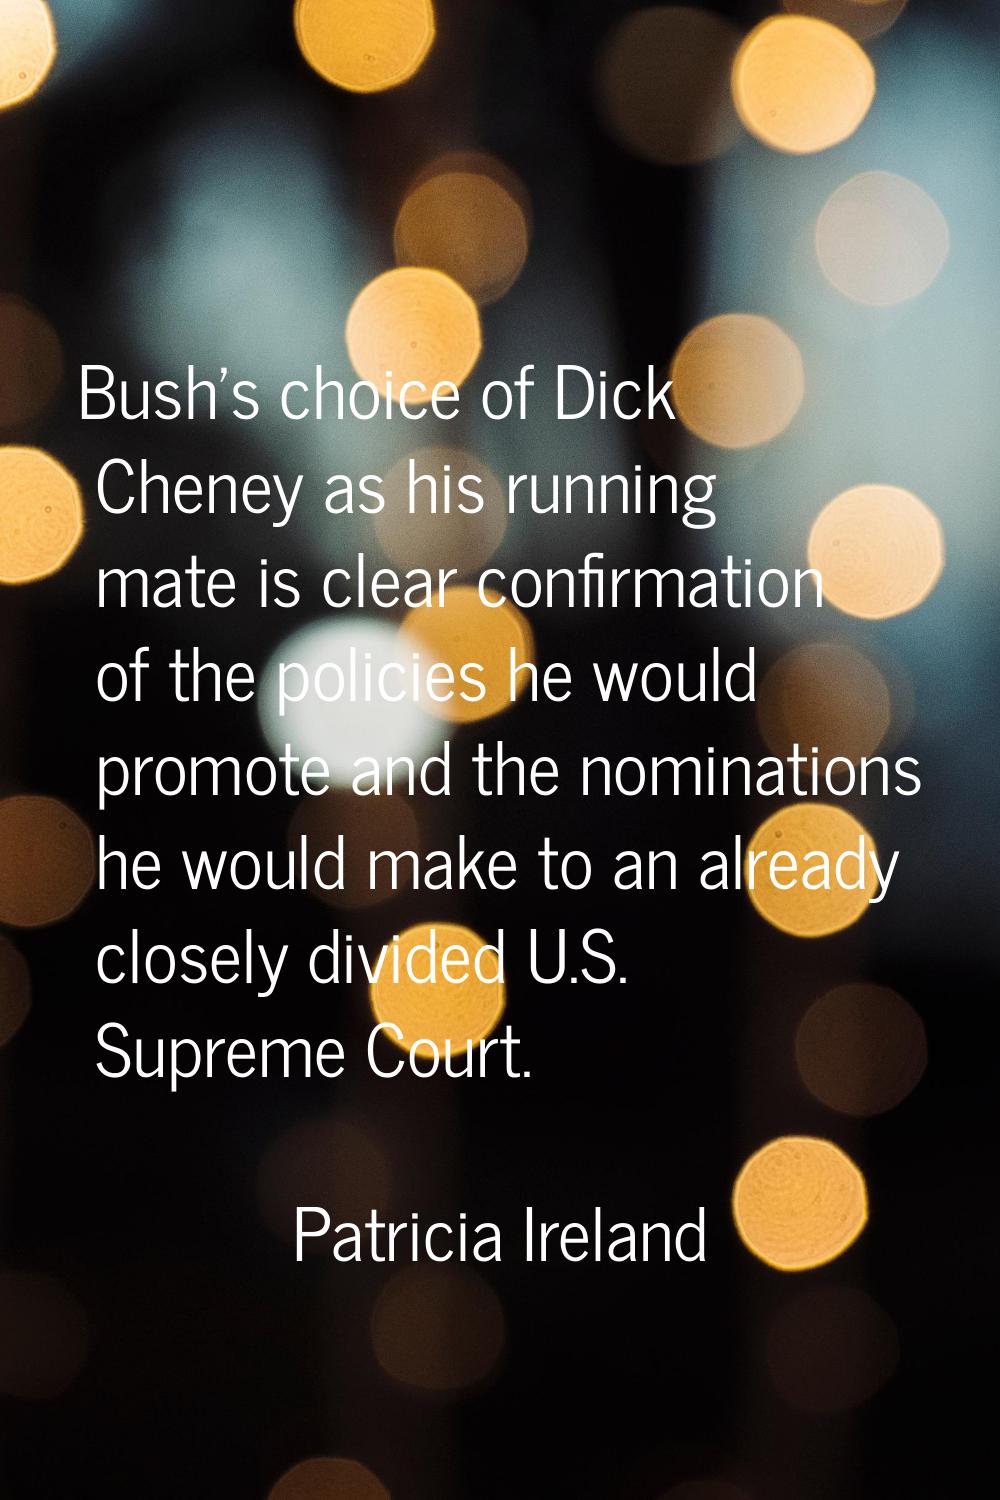 Bush's choice of Dick Cheney as his running mate is clear confirmation of the policies he would pro